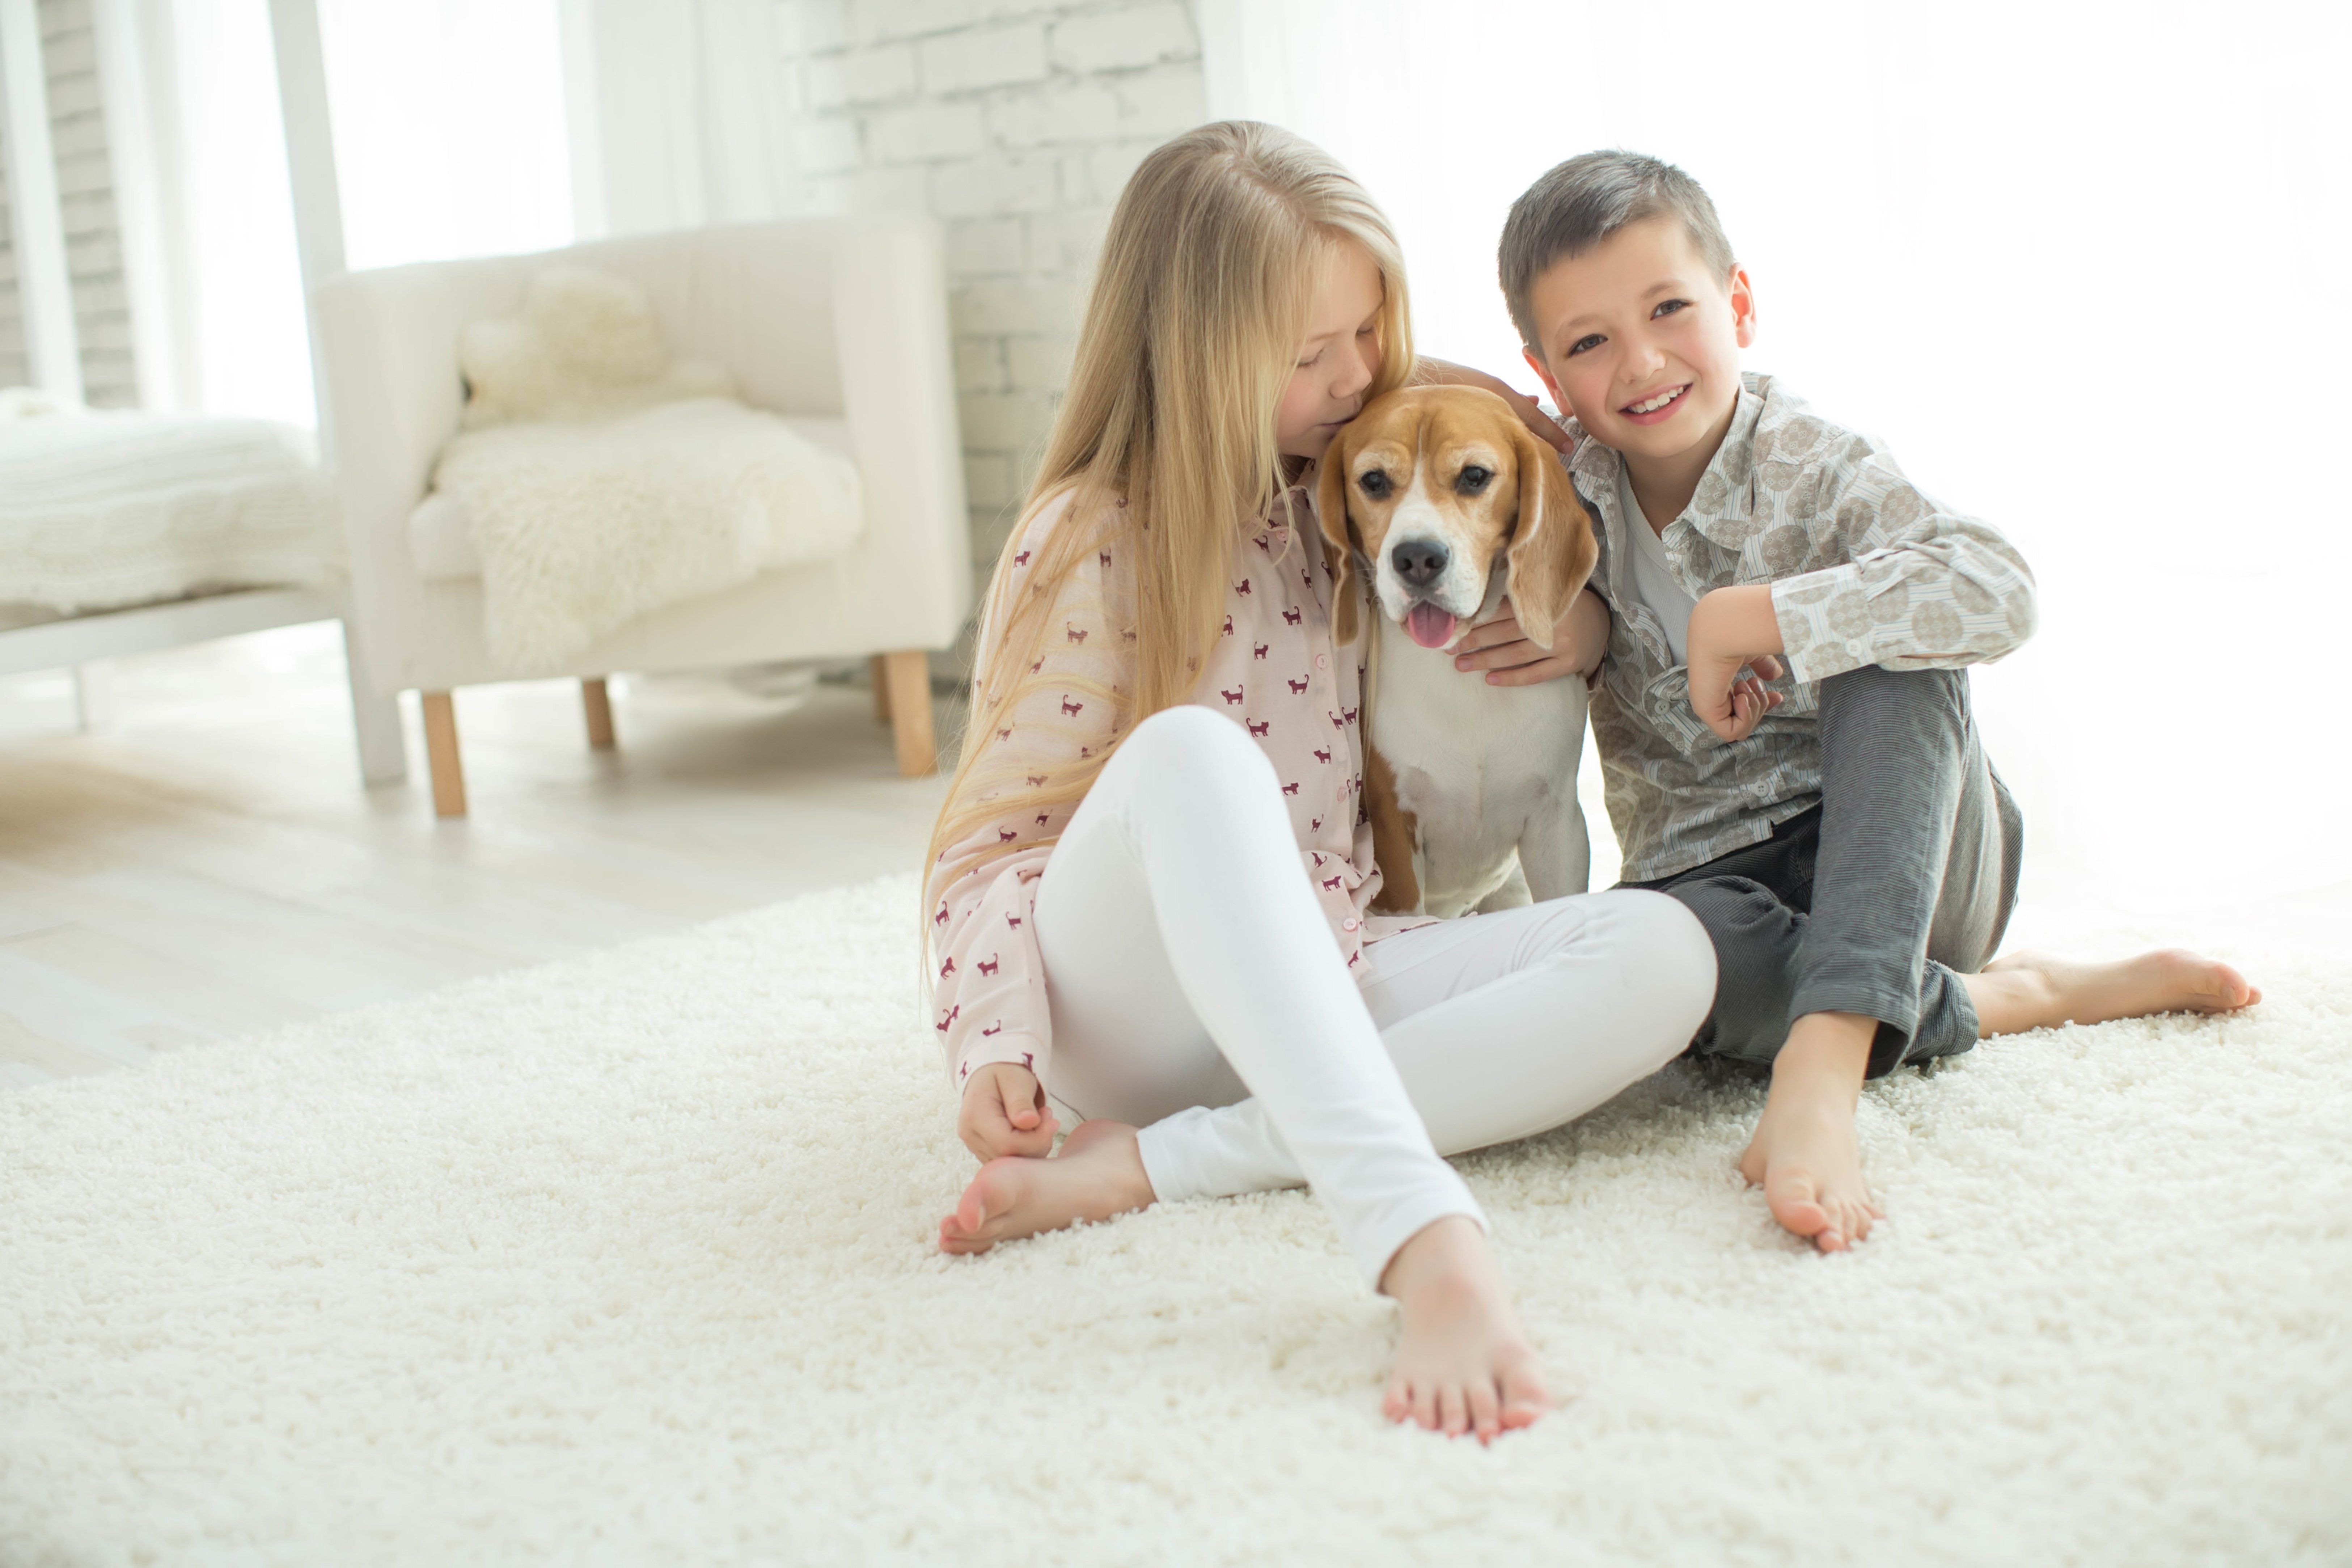 Bringing Home a New Pet: 10 Tips for Proper Care